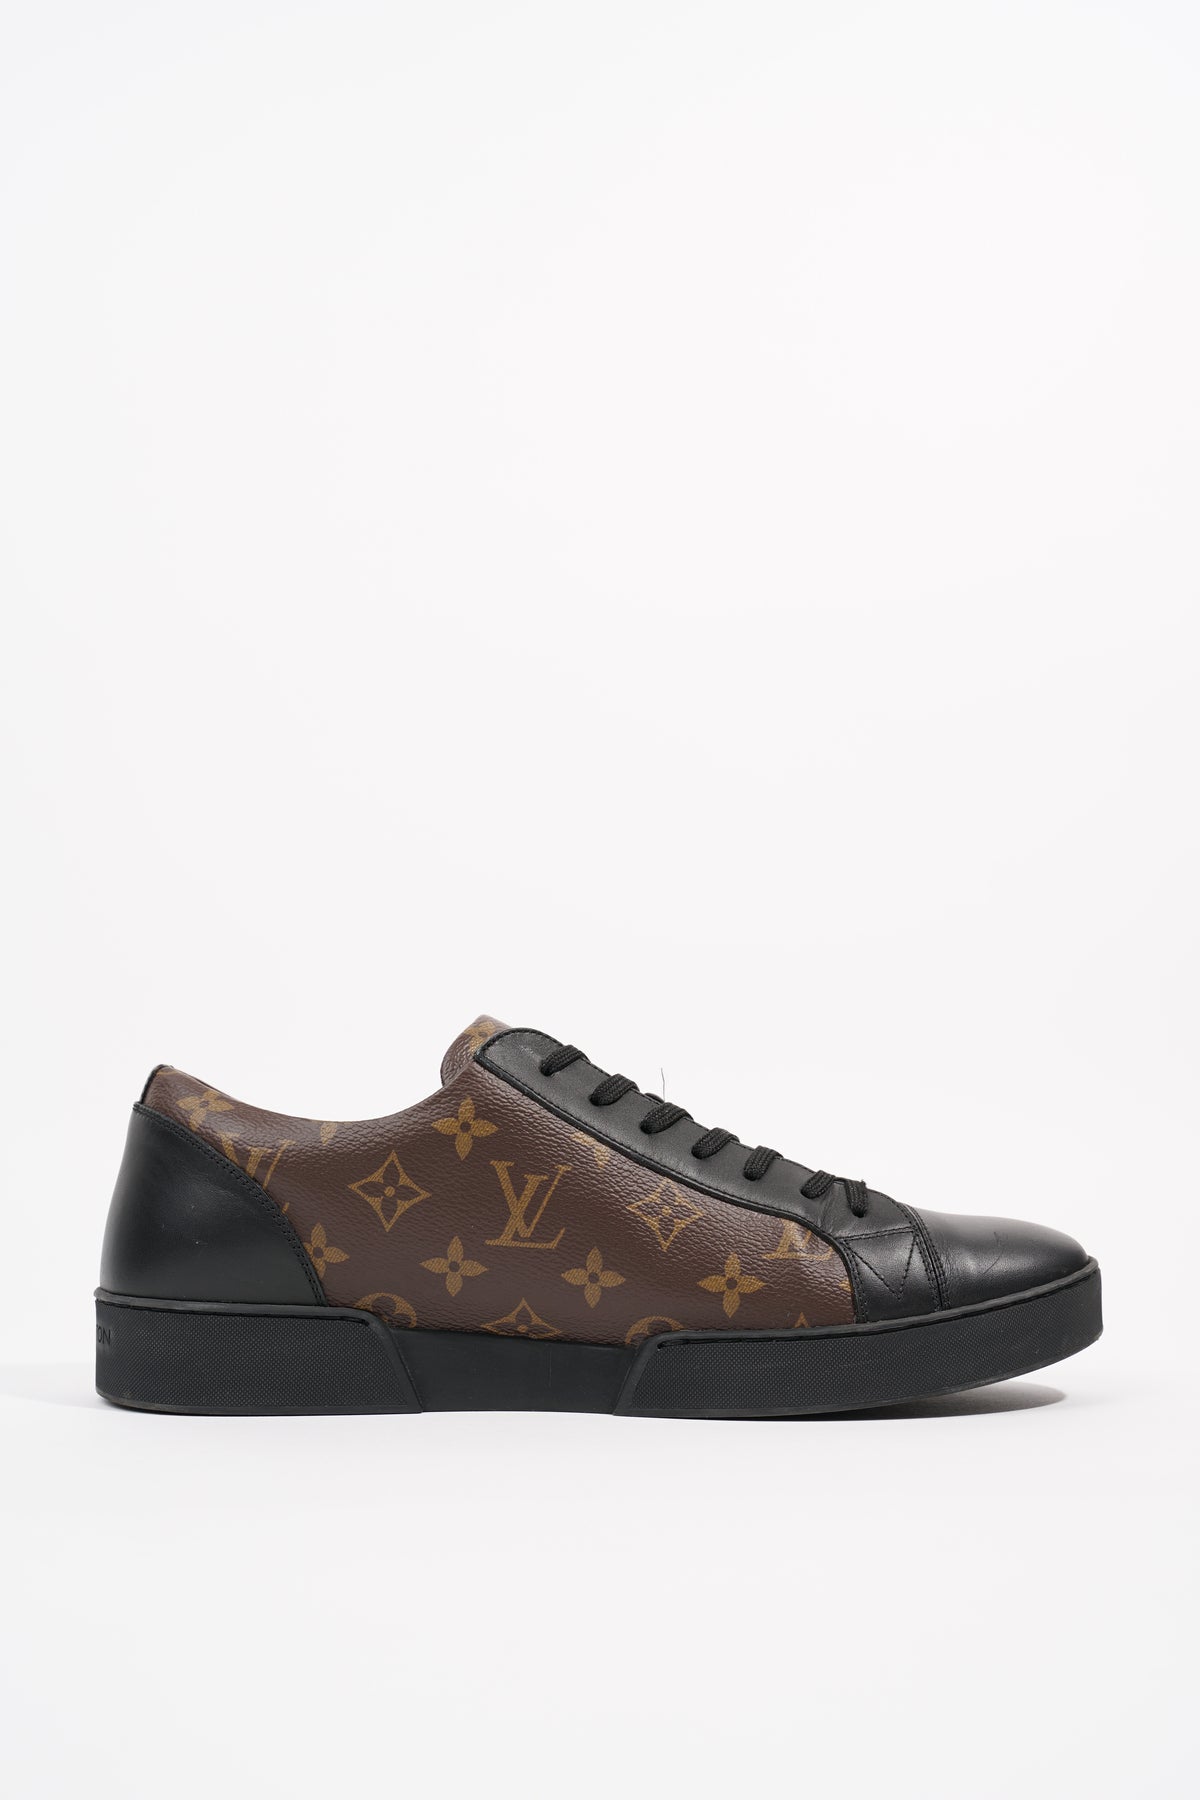 Louis Vuitton Brown Monogram Canvas And Suede Sneakers Size 43.5